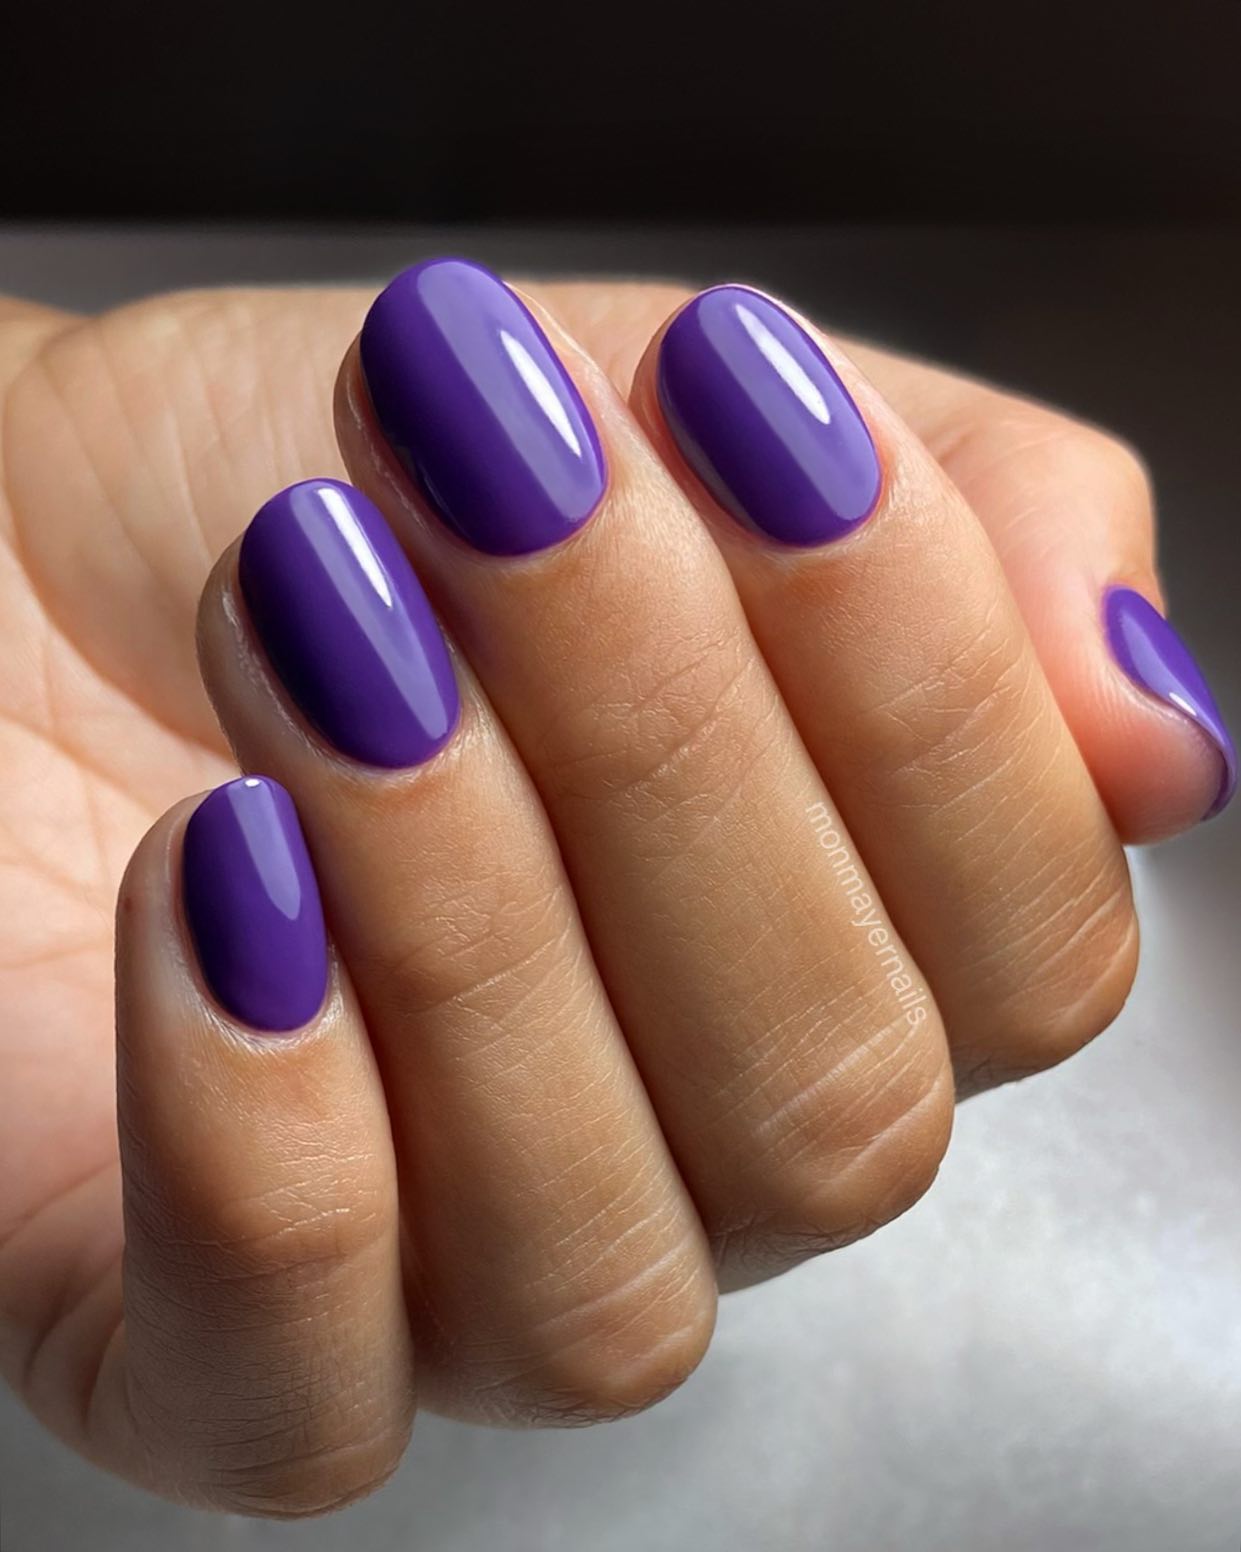 Purple nails are a fun way to express your creativity and individuality. They can be used to create a whole new look or as an accent nail, depending on your mood and how much time you want to spend on your nails!